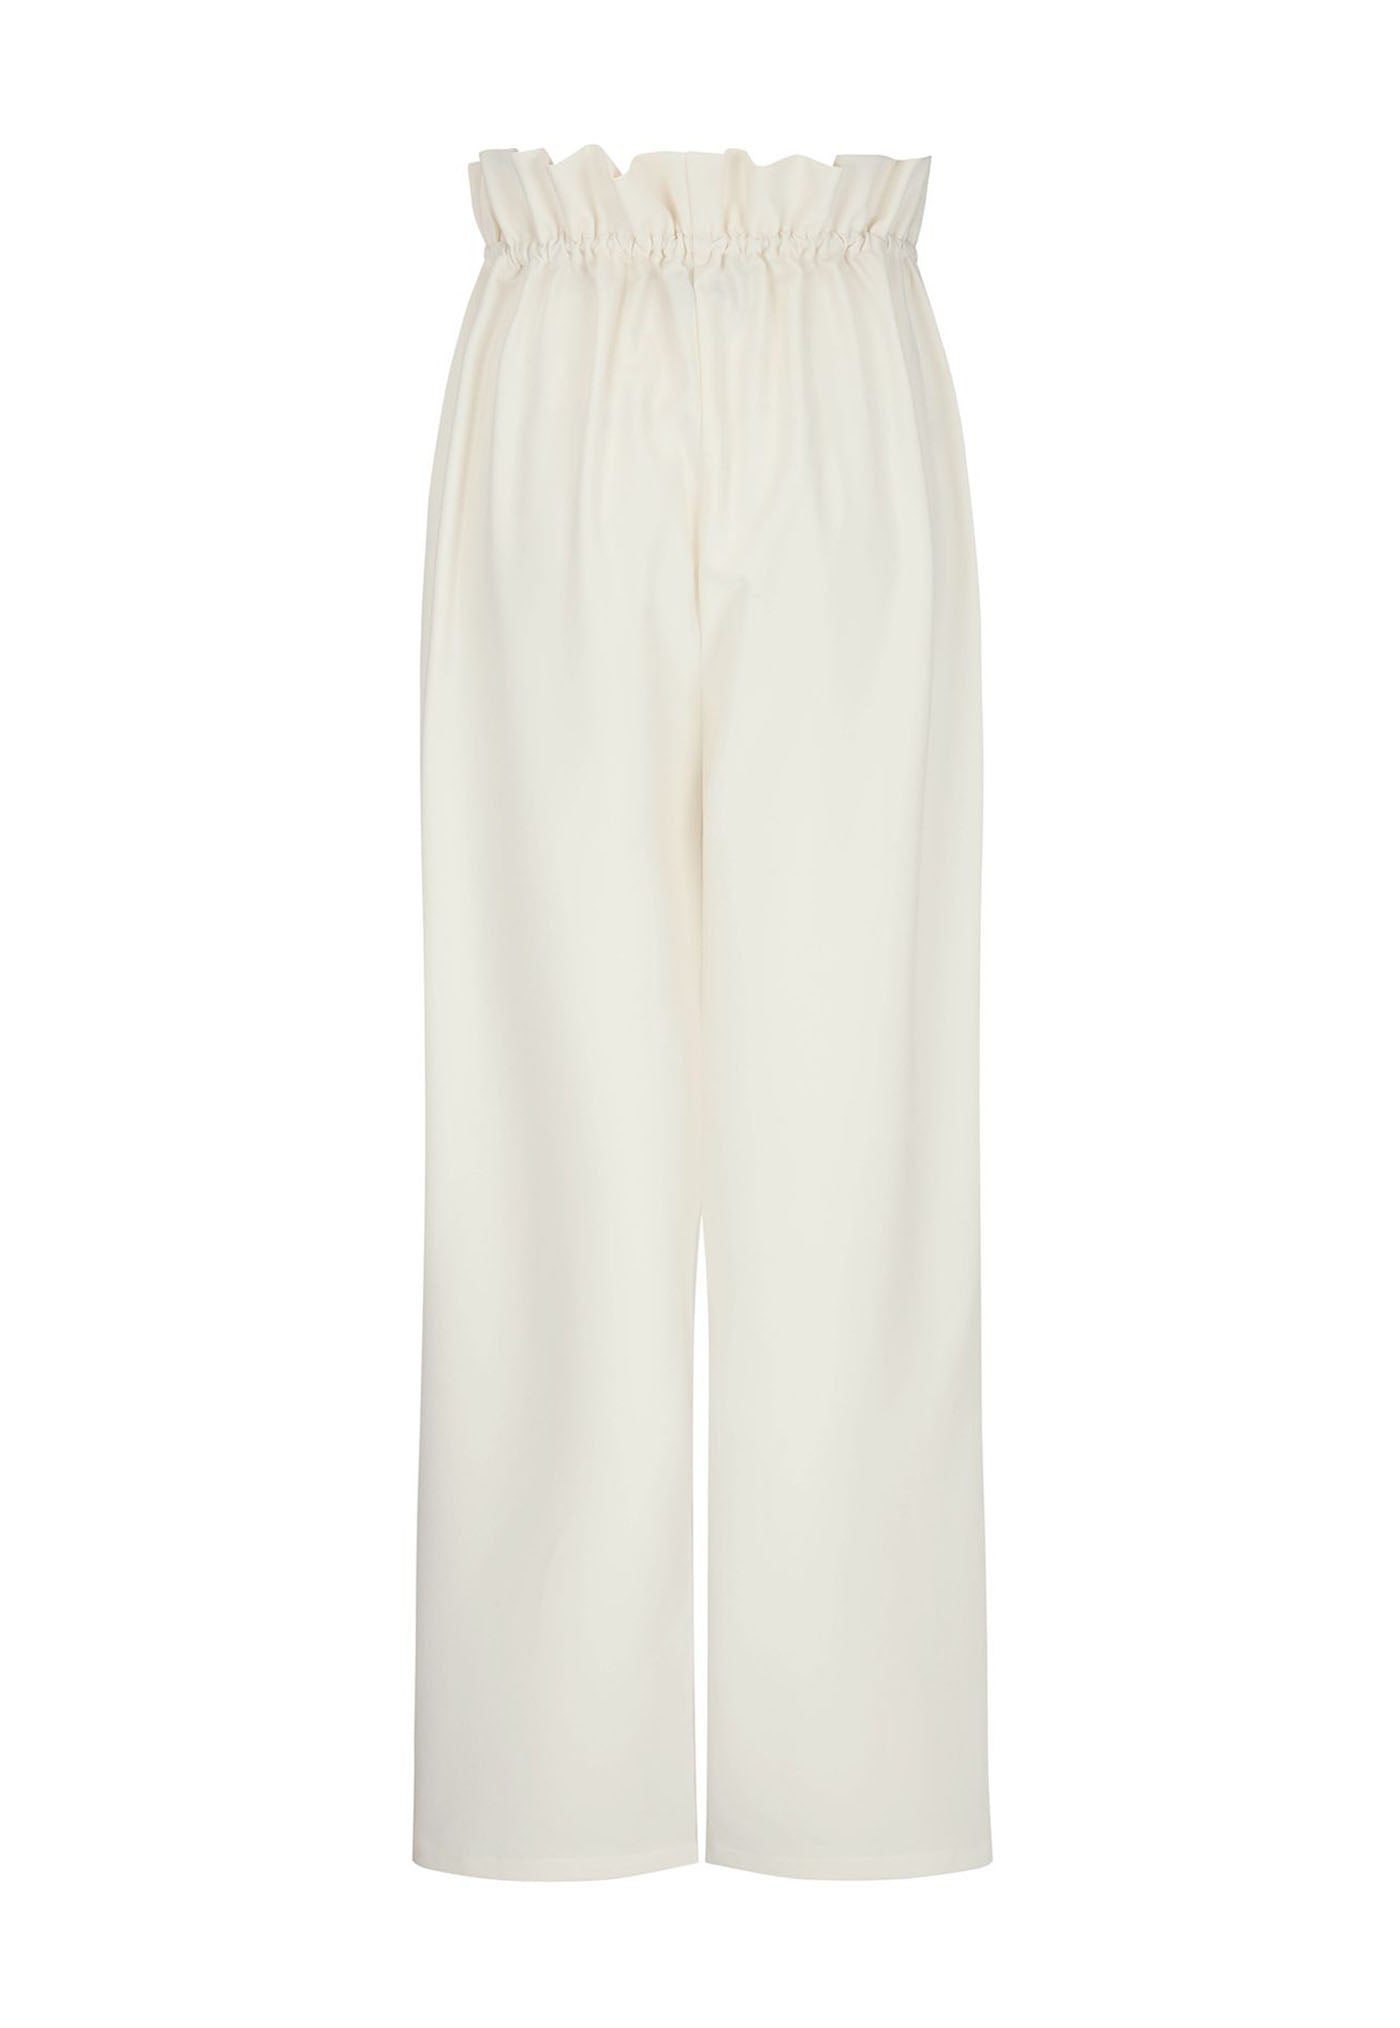 Sherman Trouser - Ivory sold by Angel Divine